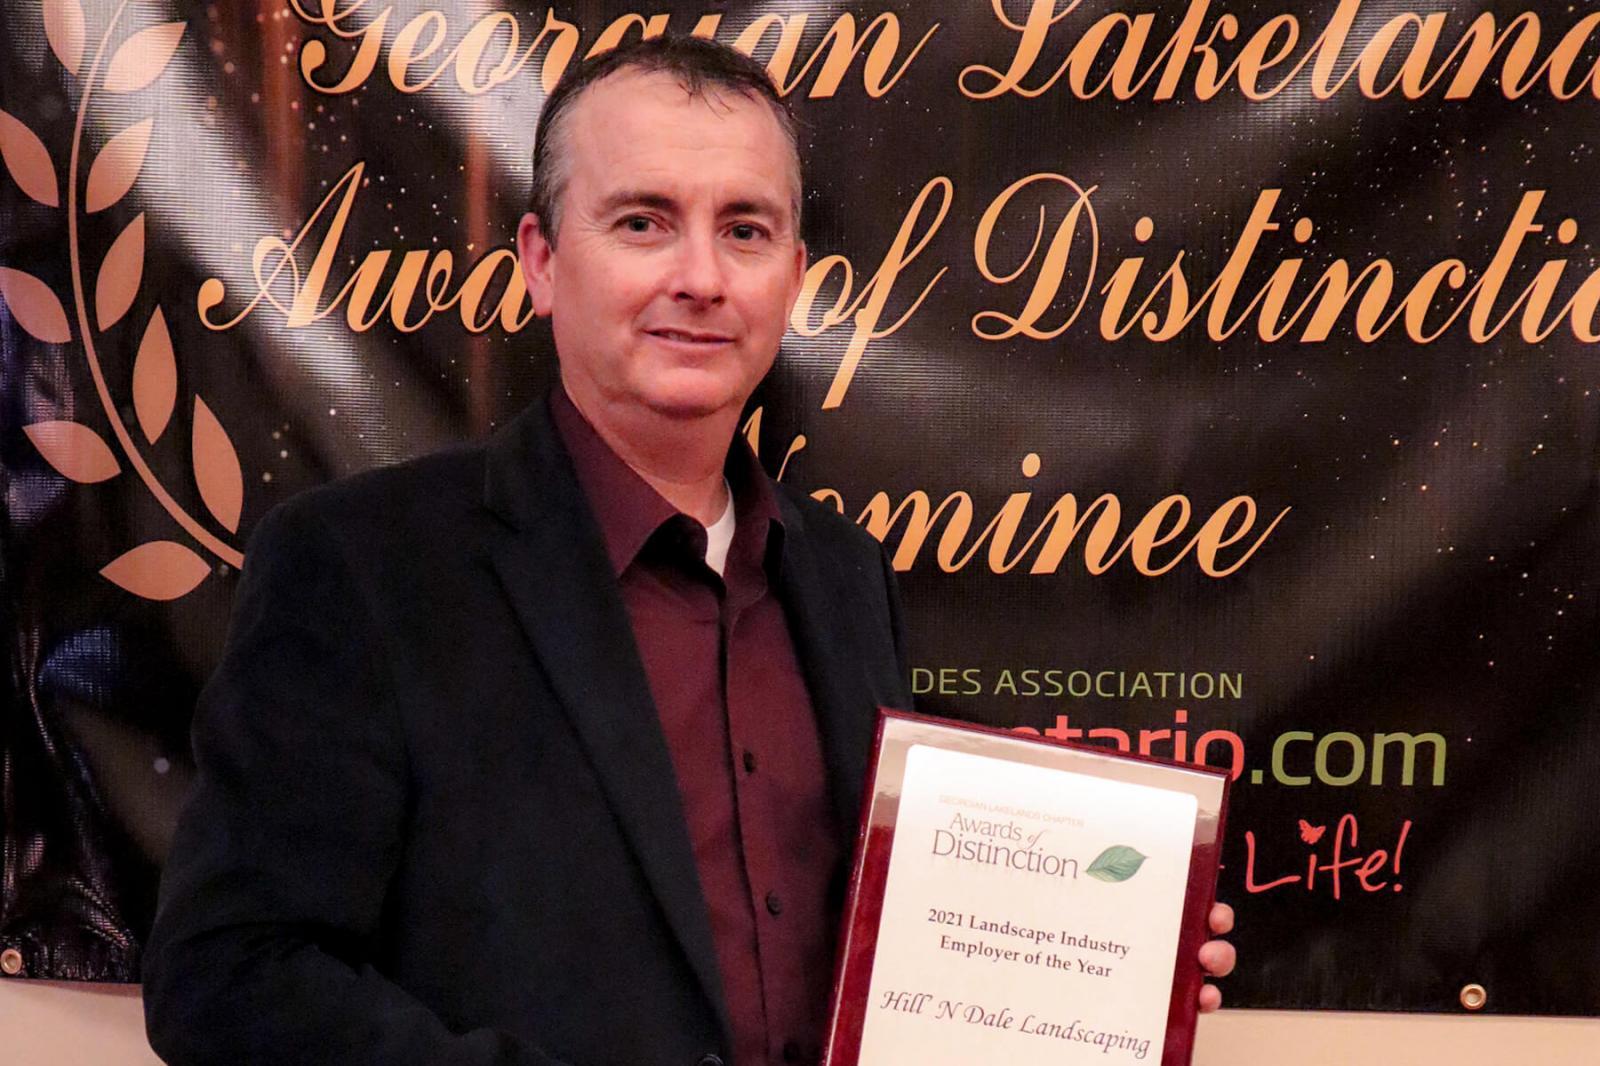 Hill’N Dale Landscaping owner, James Godbold was awarded Employer of the Year by industry peers.